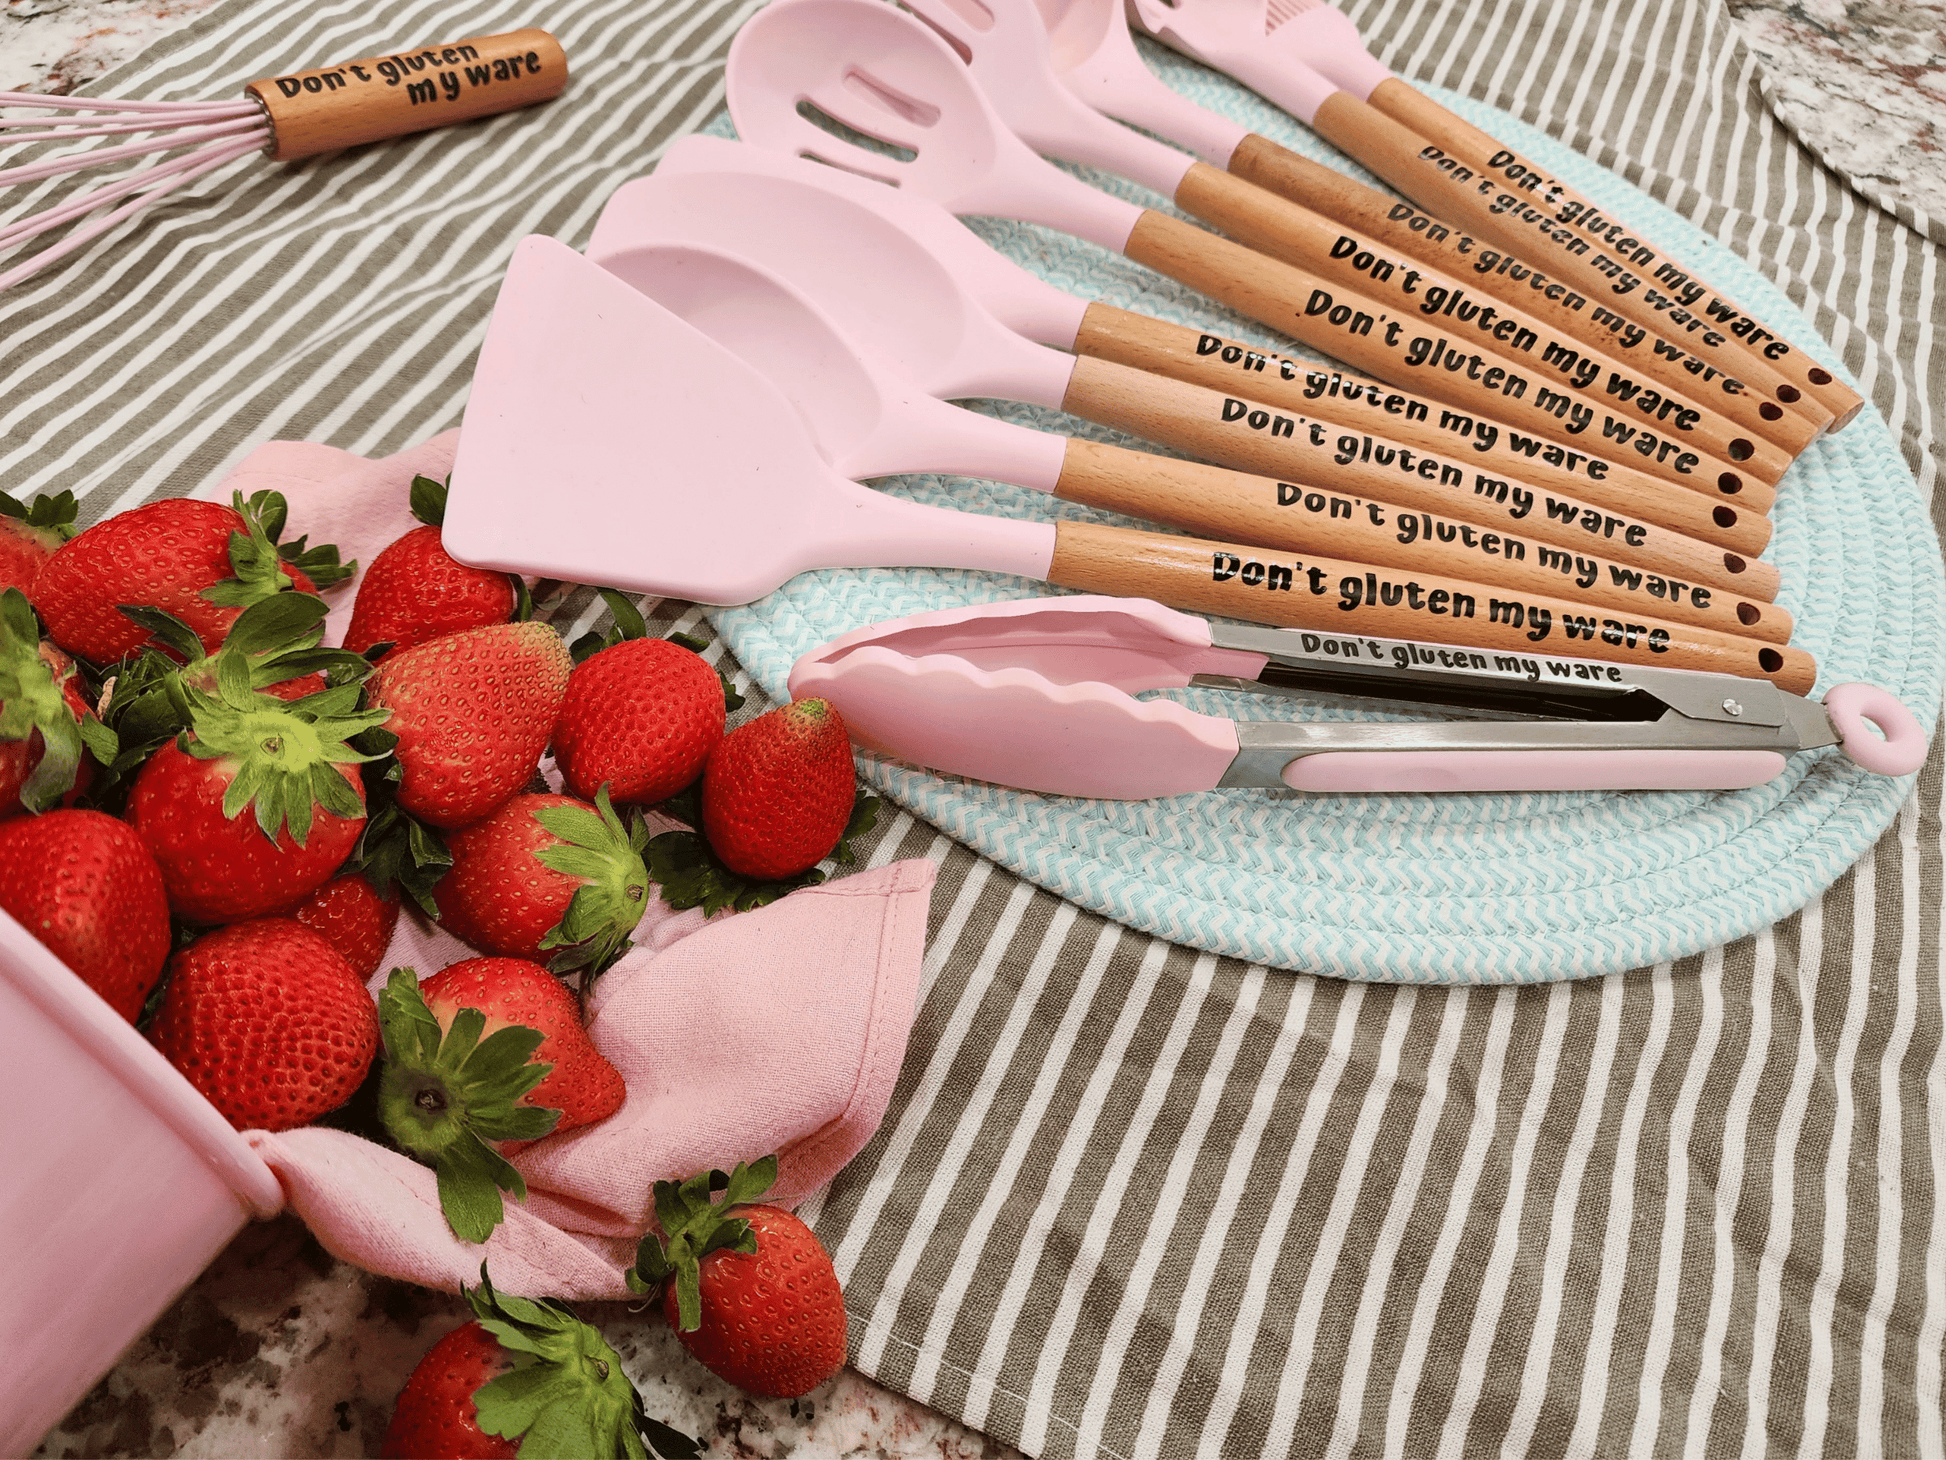 BVicHair 4 Wooden Spoons and Forks Set, Set Wooden Salad Spoons, Real  Housewives Gifts, Kitchen Gifts for Women, Handmade Gifts for Mother's Day,  Cute